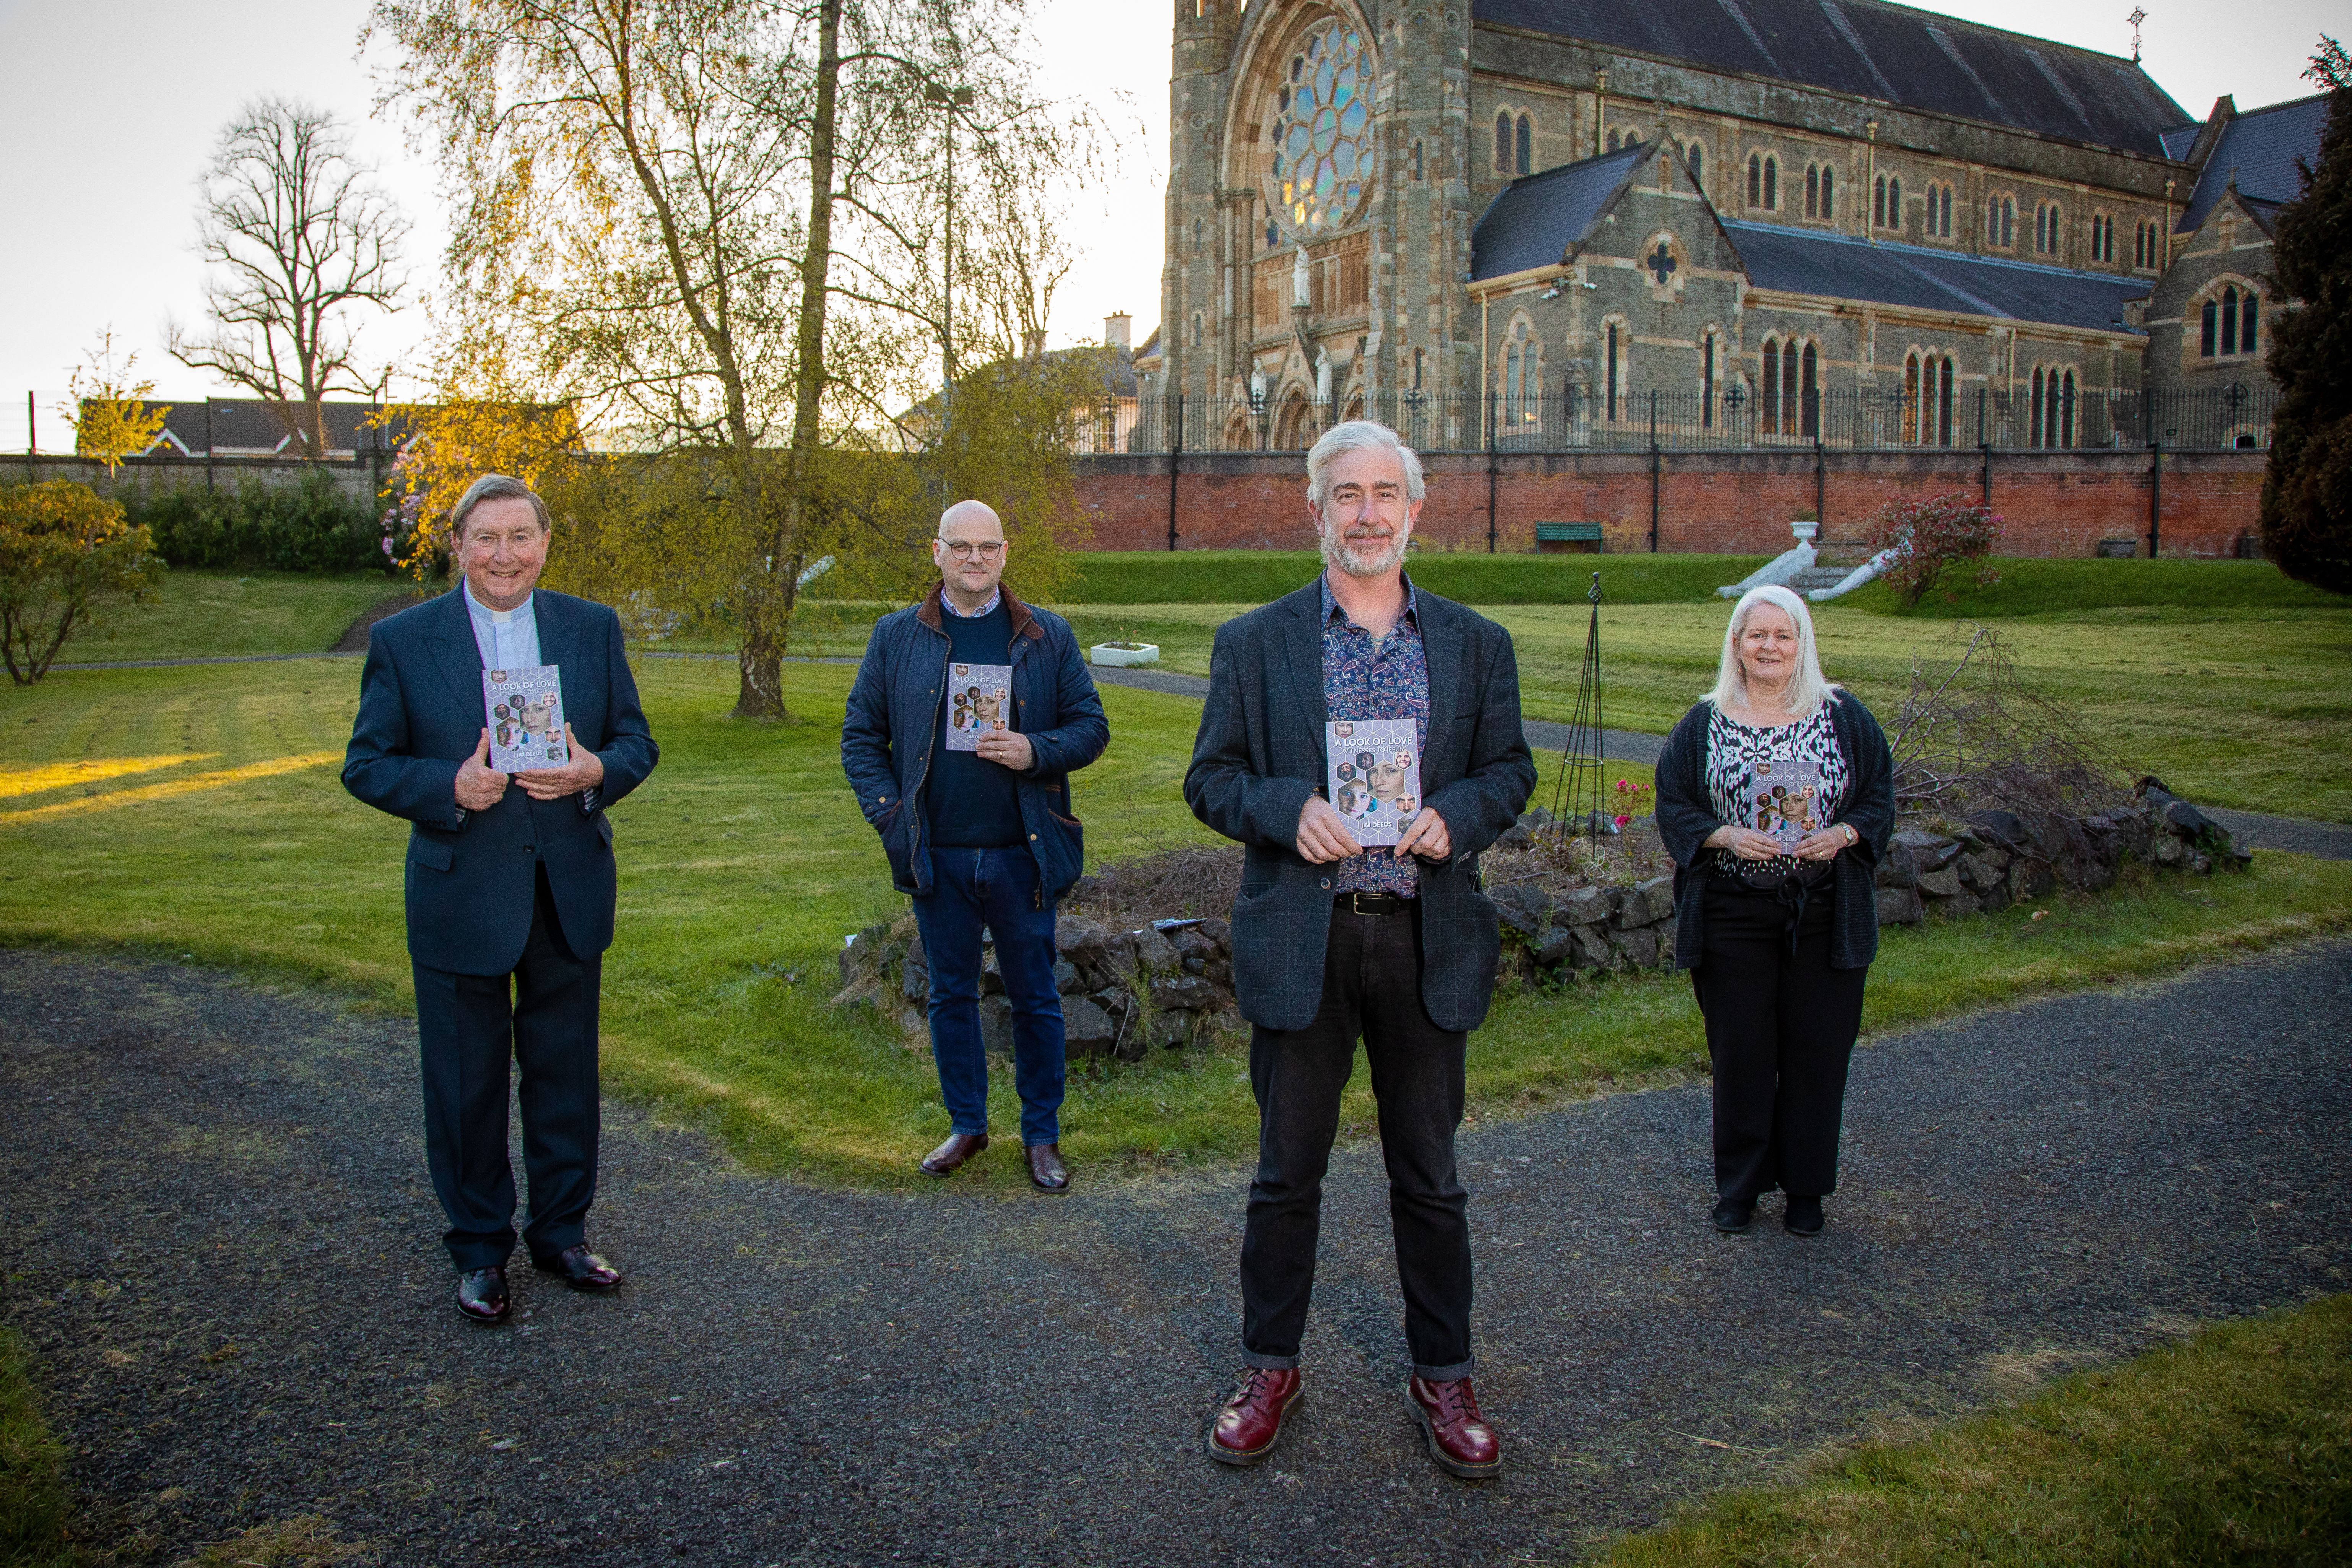 LAUNCH: Jim Deeds, centre, with Fr Brian D’Arcy, Brendan Dineen and Caren Collins during the book launch at Clonard Monastery